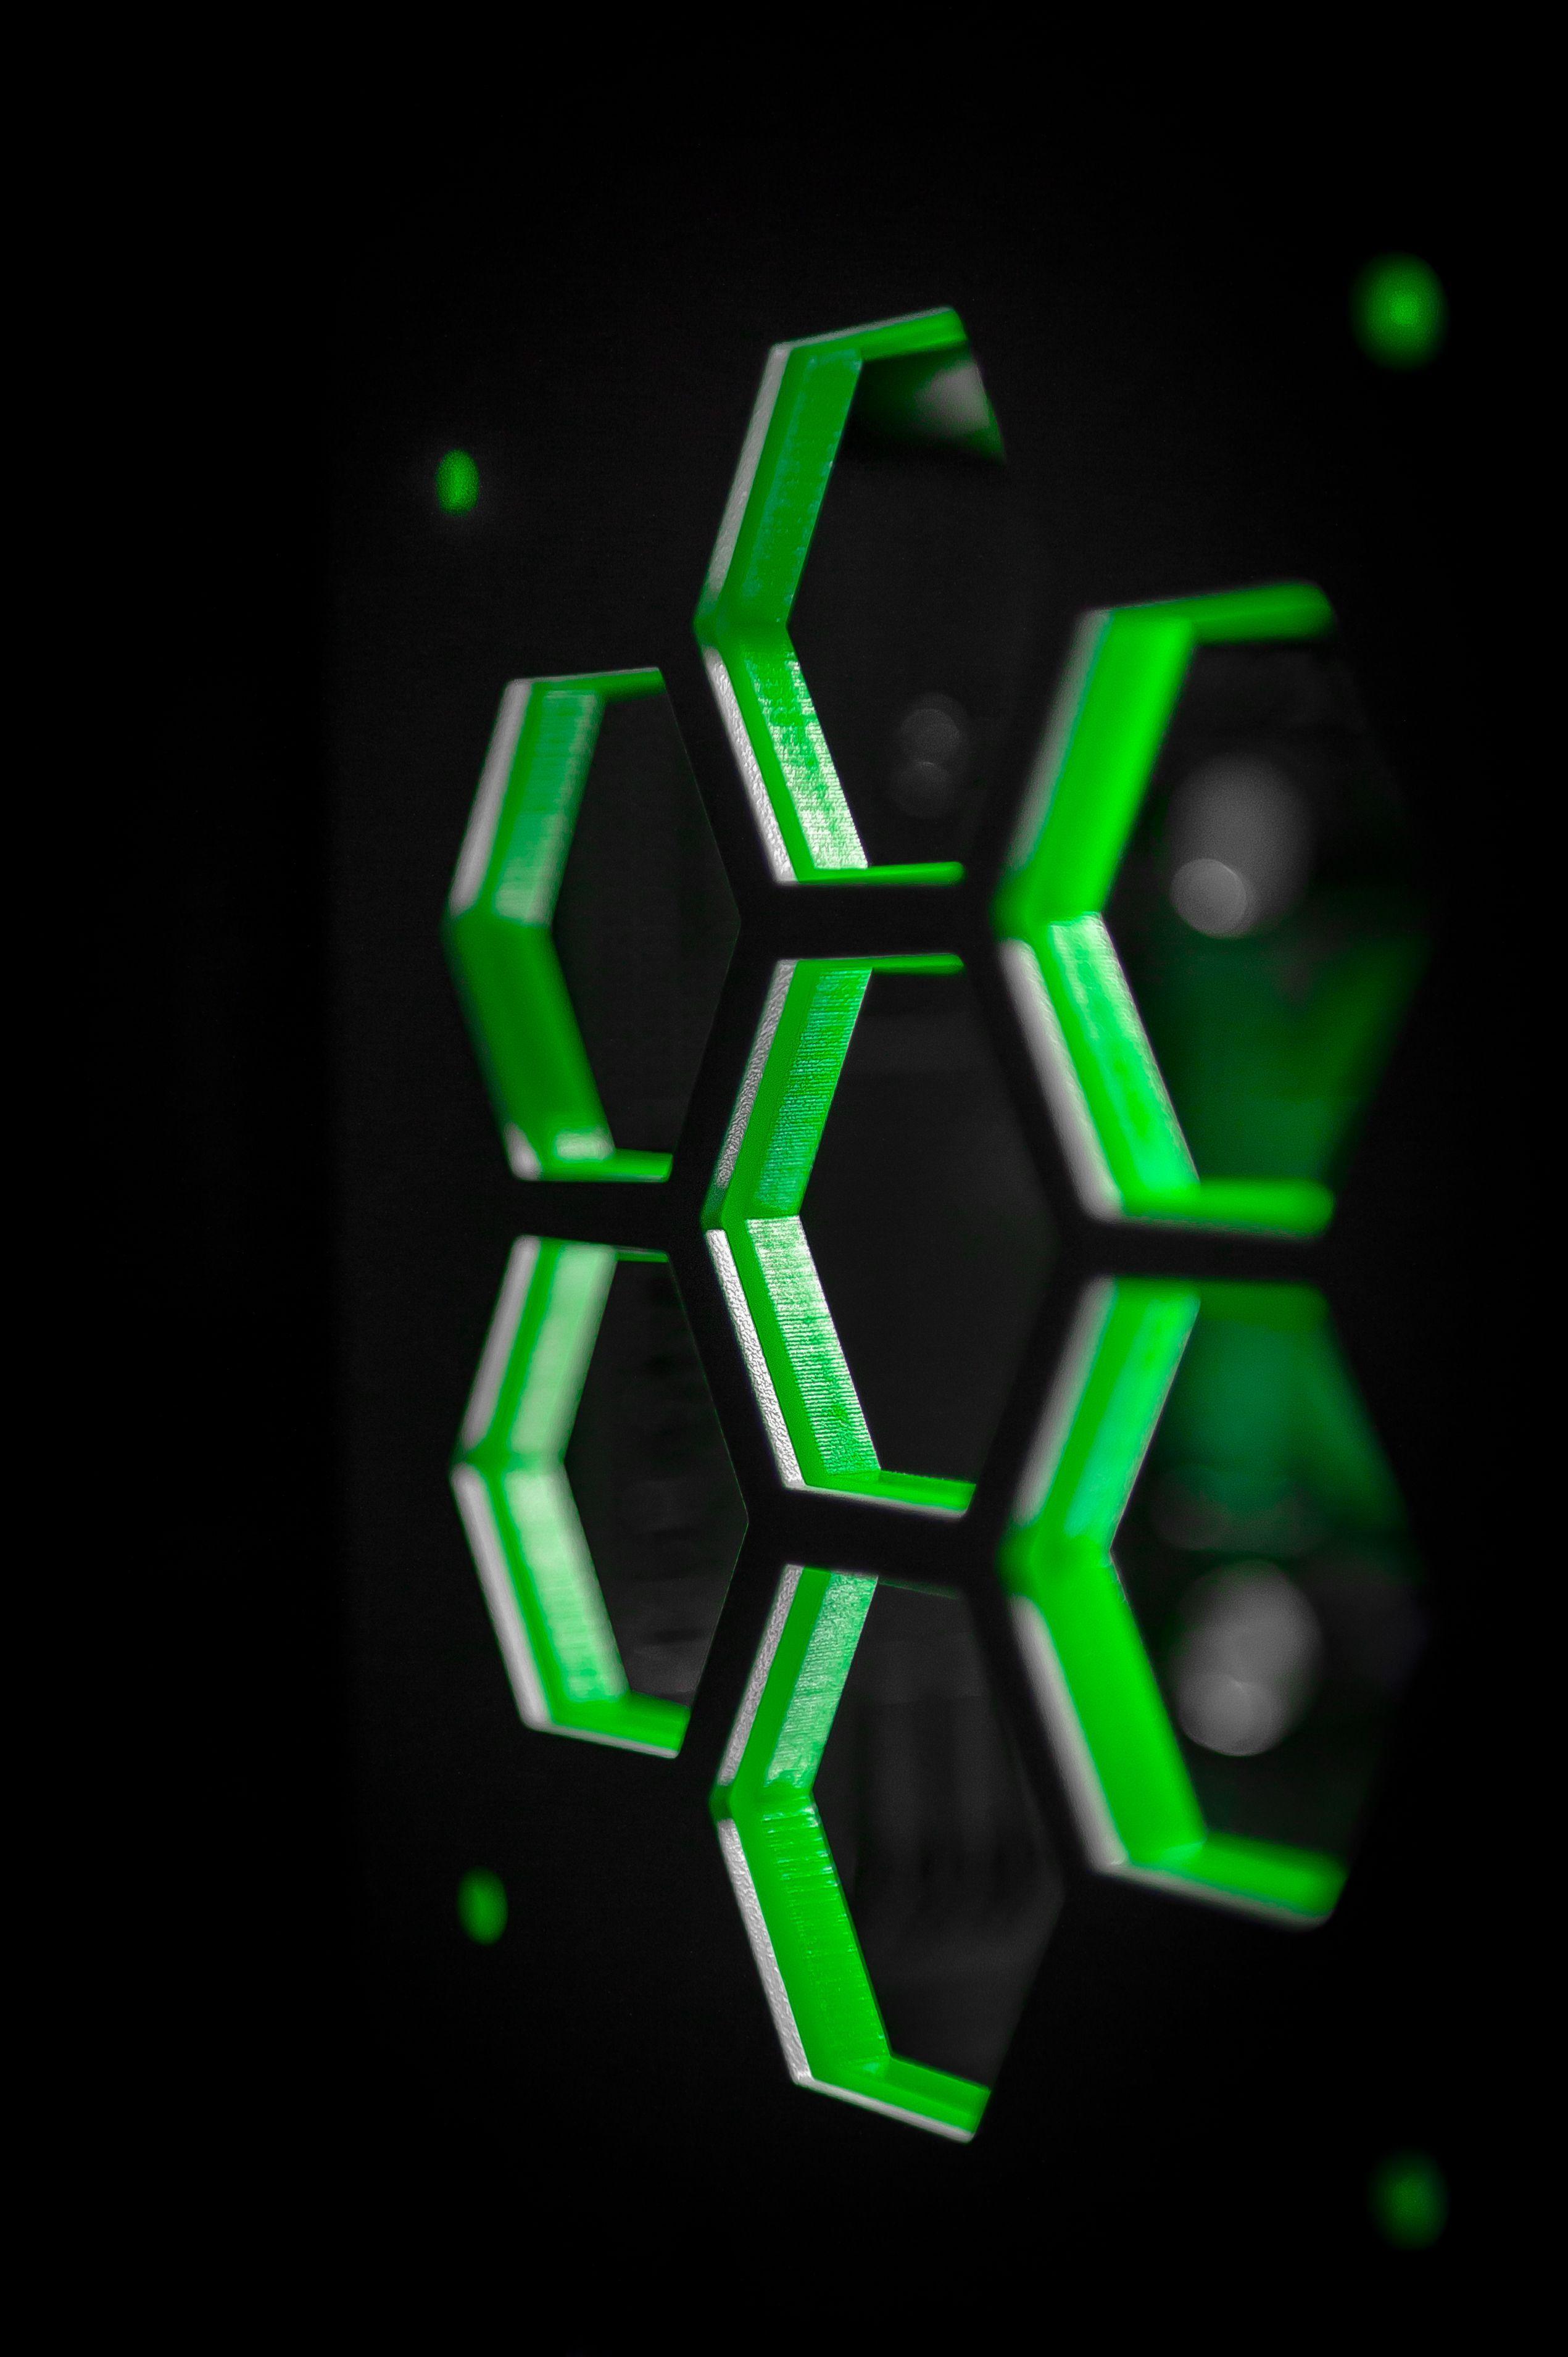 R40 Logo - Pin by D Leong on HexGear R40 Green Cryo Build in 2019 | Logos ...